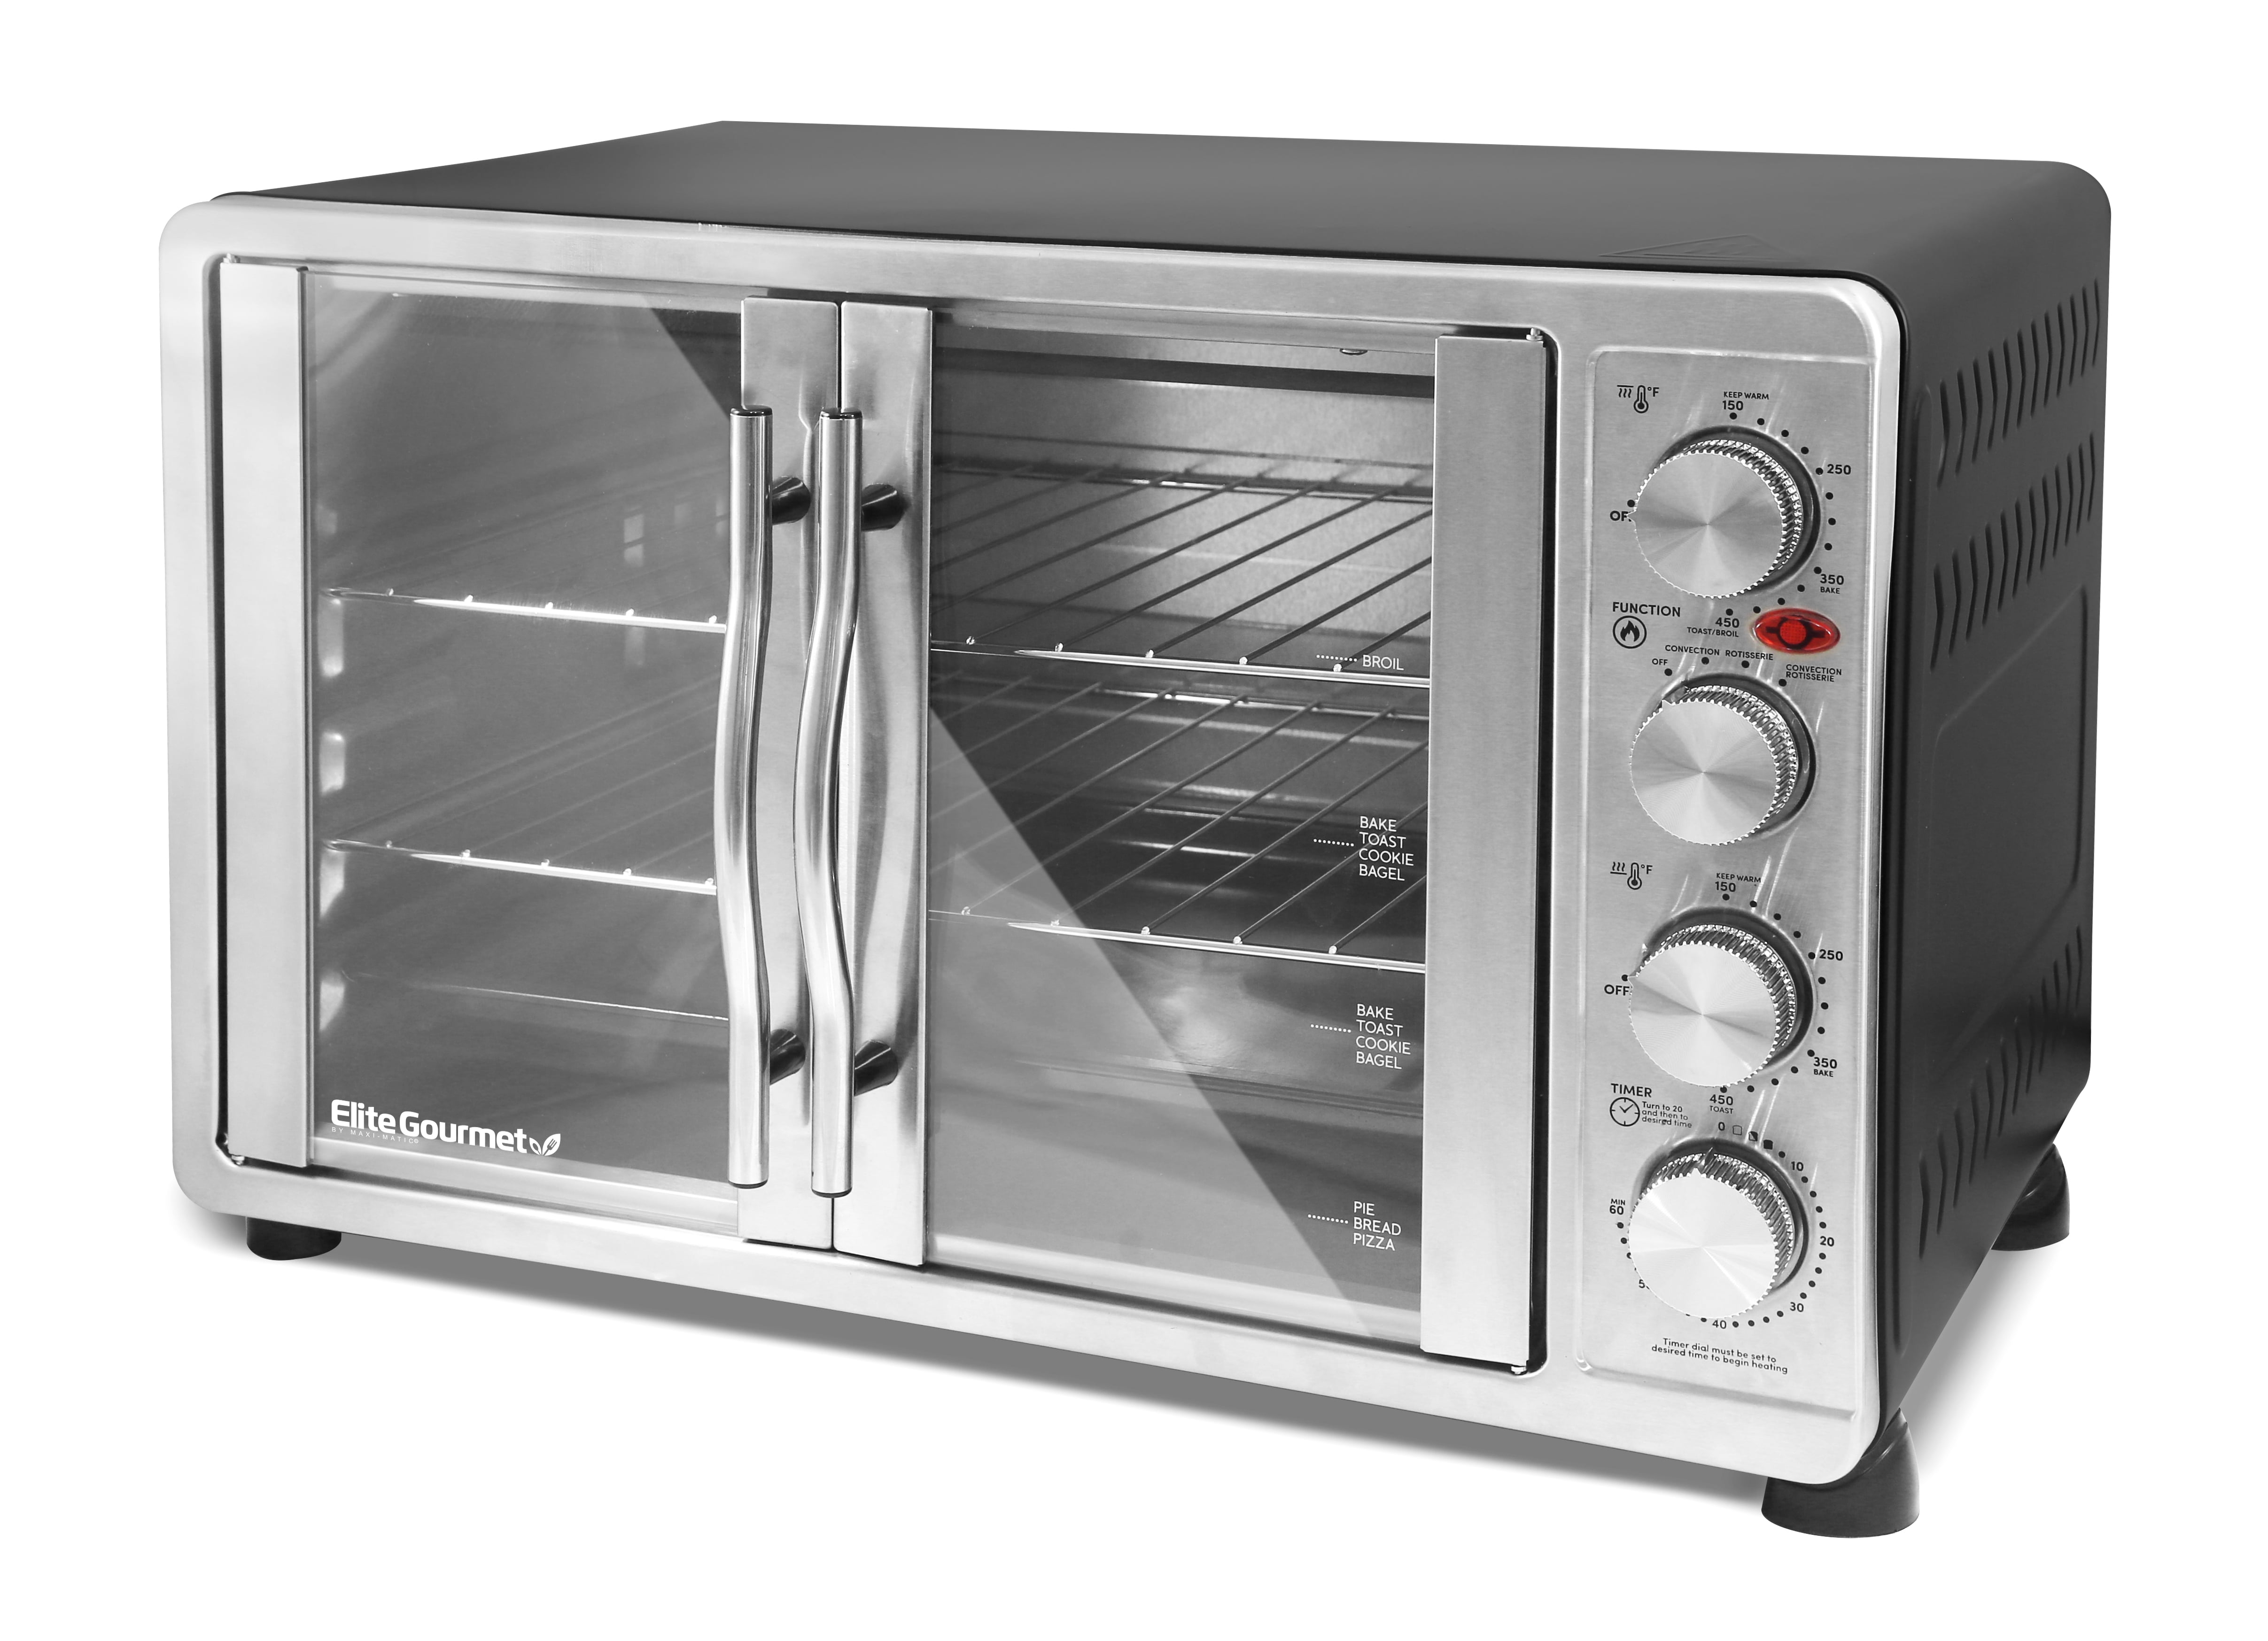 GE - Calrod 6-Slice Toaster Oven with Convection bake - Stainless